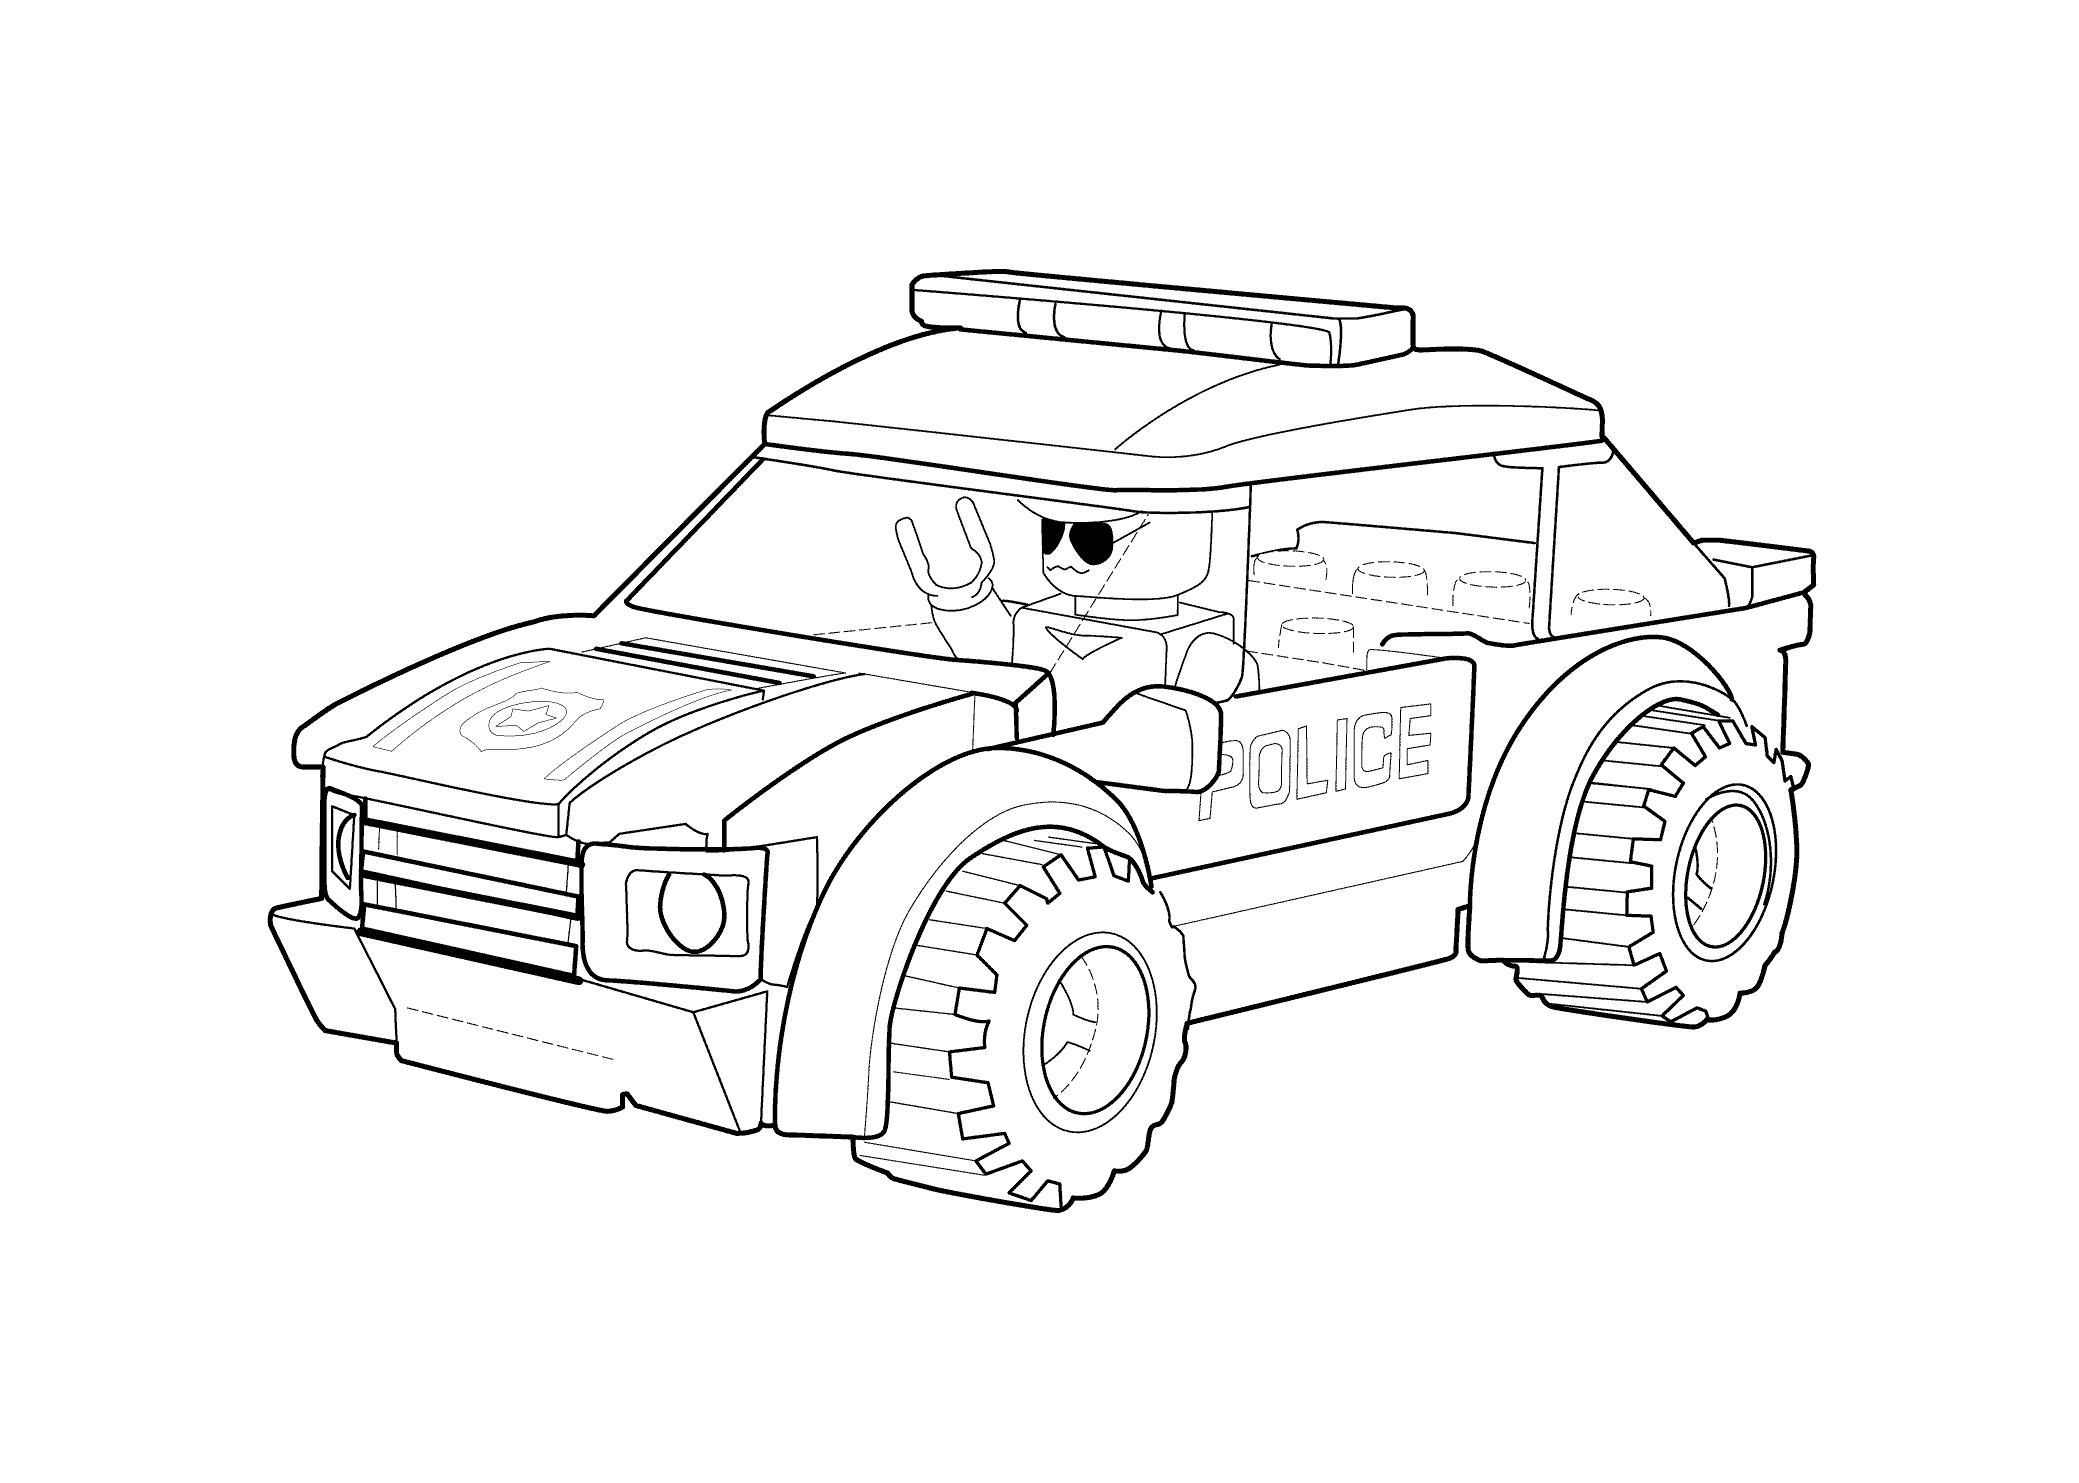 lego cars colouring pages lego city coloring pages bestappsforkidscom pages colouring lego cars 